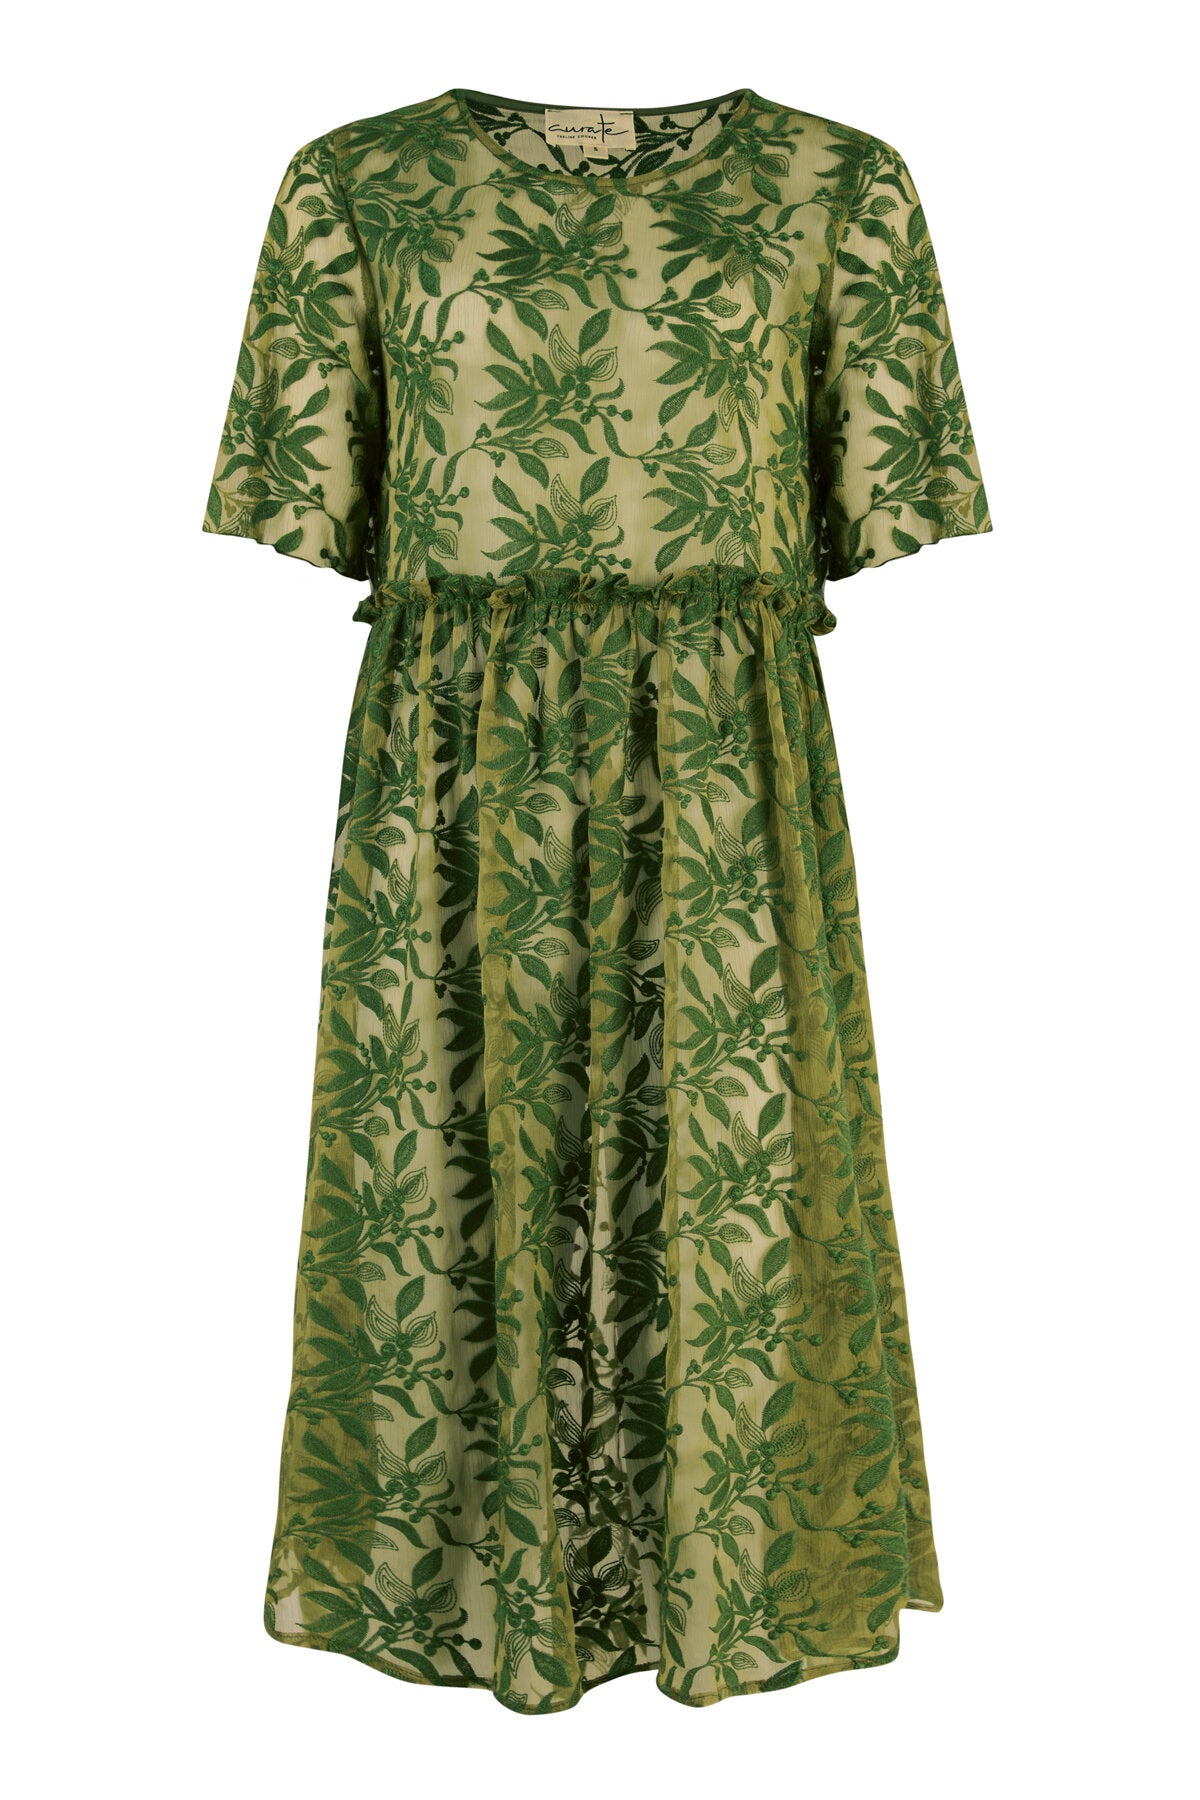 Trelise Cooper - Take The Plunge Dress Forest – Aspirations Brighton